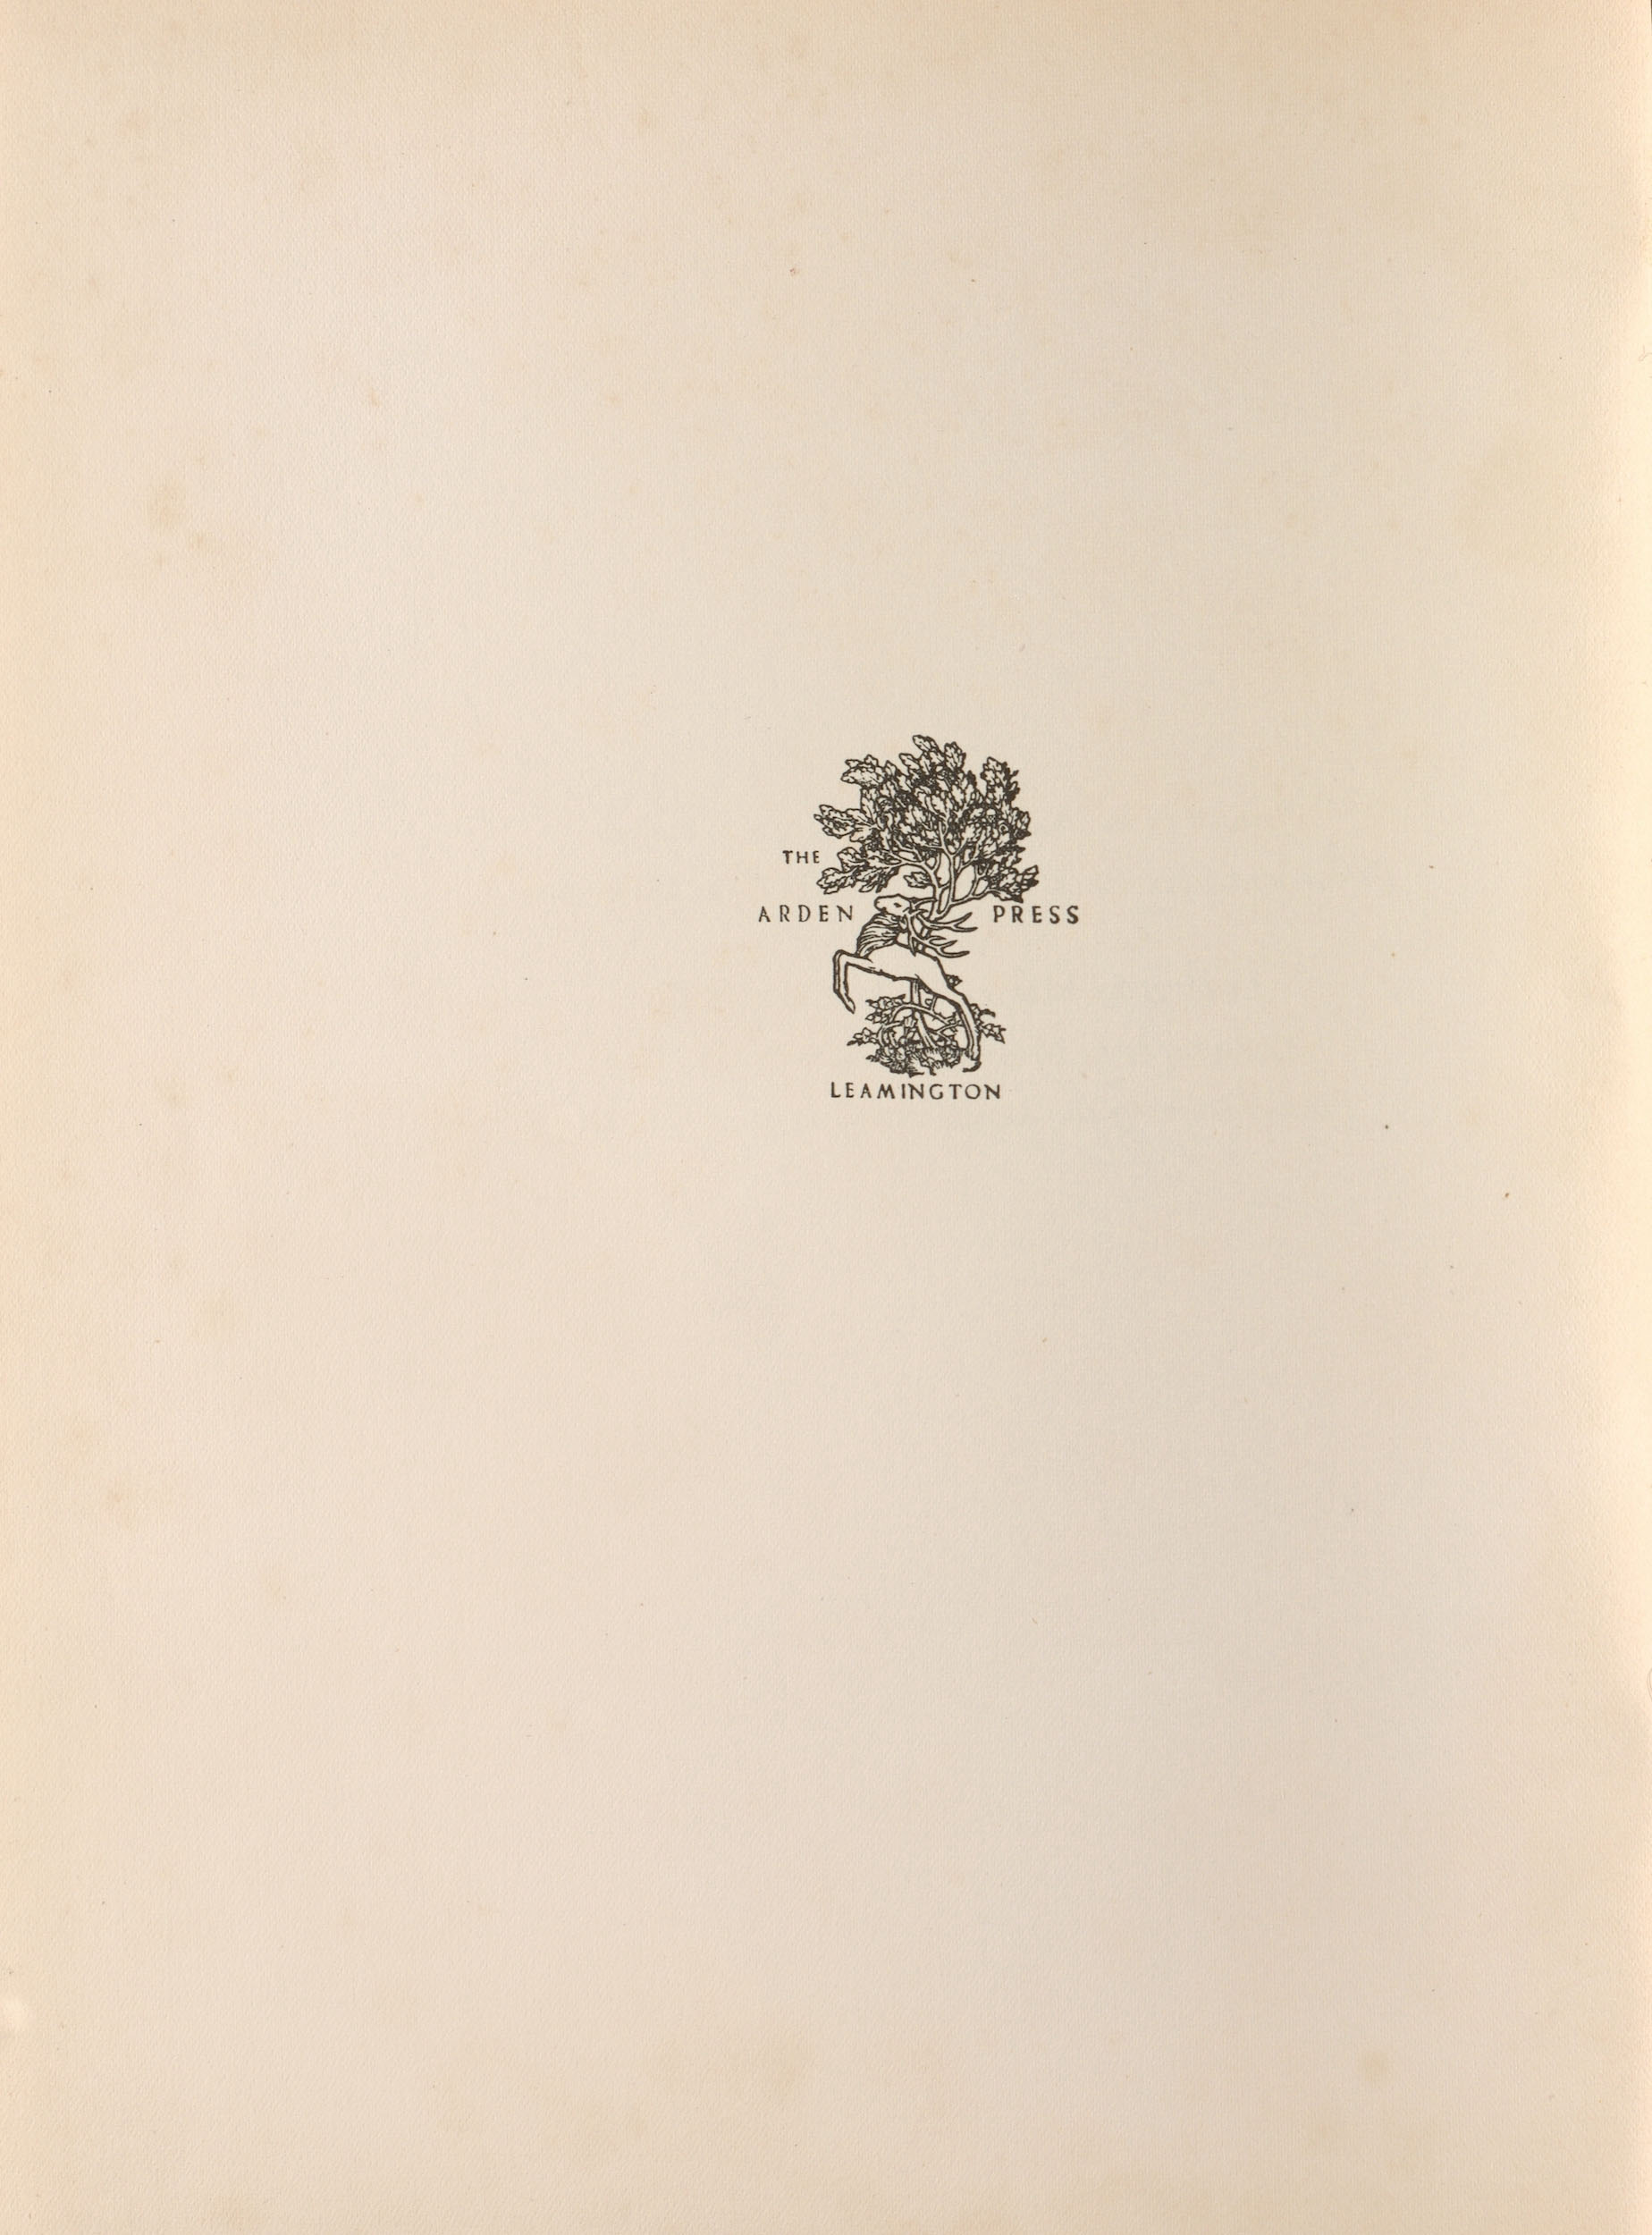 Arden Press imprint:"The Arden Press Leamington Colophon" and a small printed image of a leafy tree behind a deer with large antlers and front hooves raised.